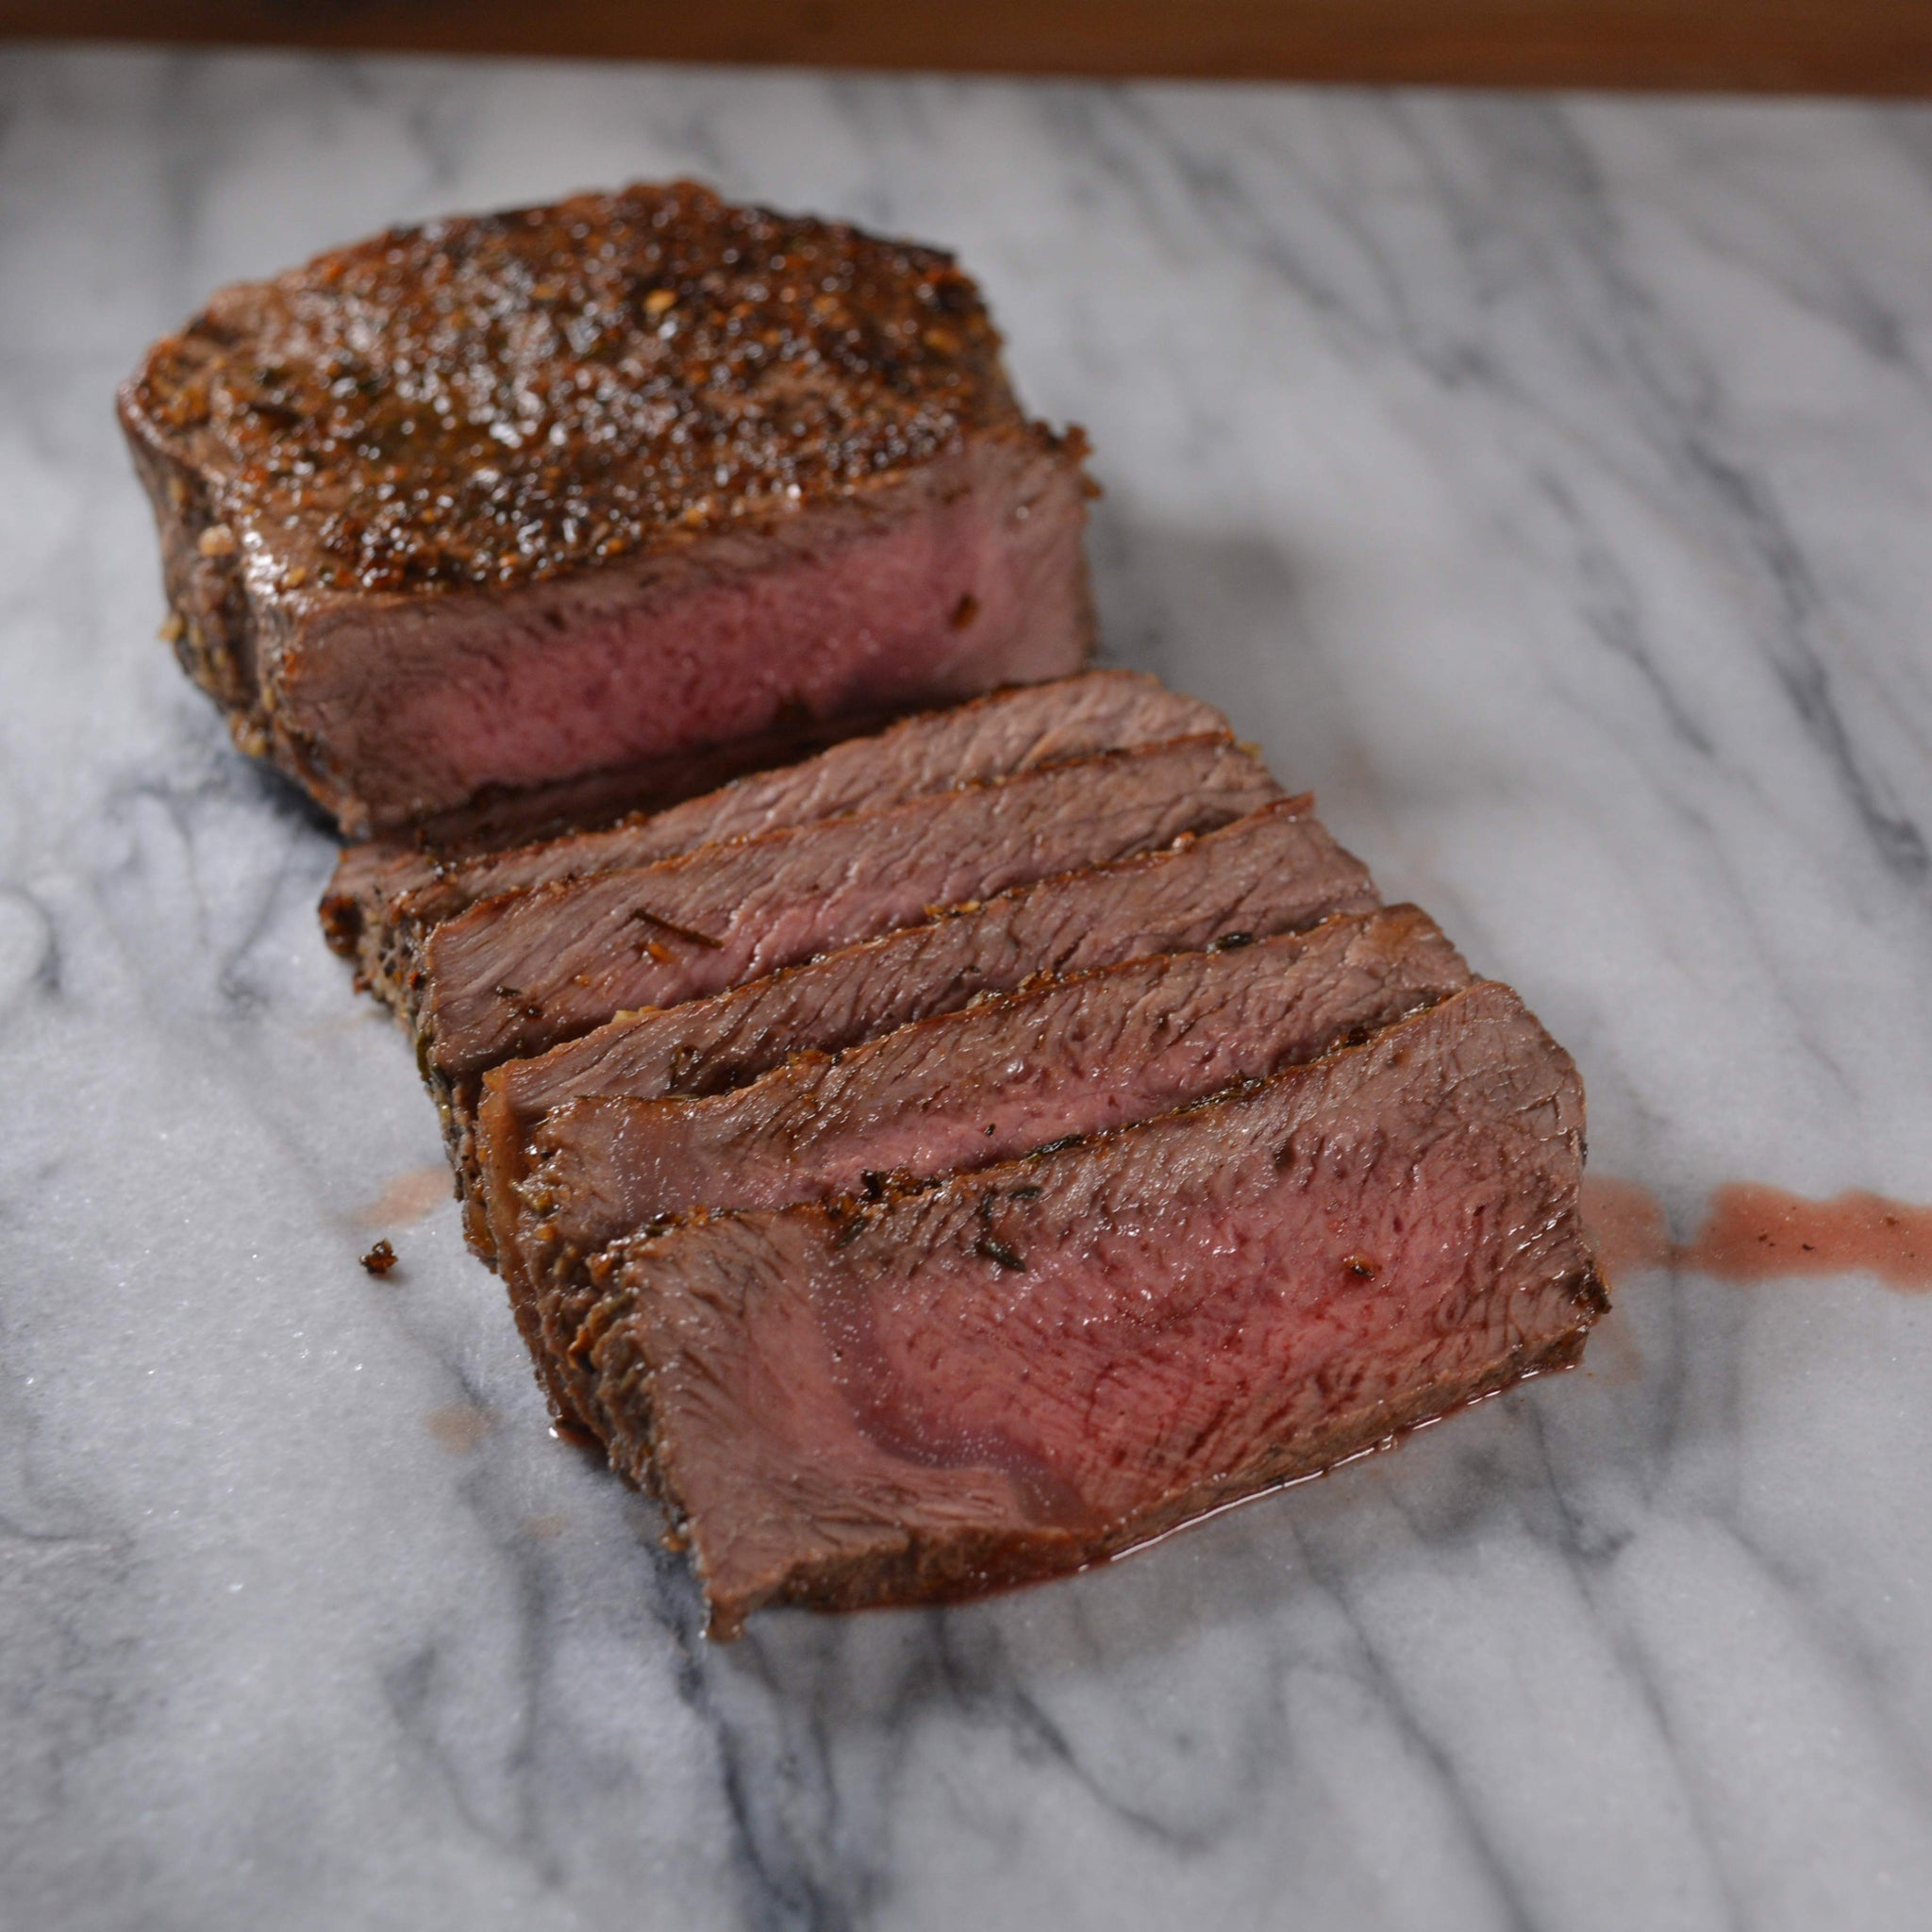 The perfect steak from the Cinder Grill.